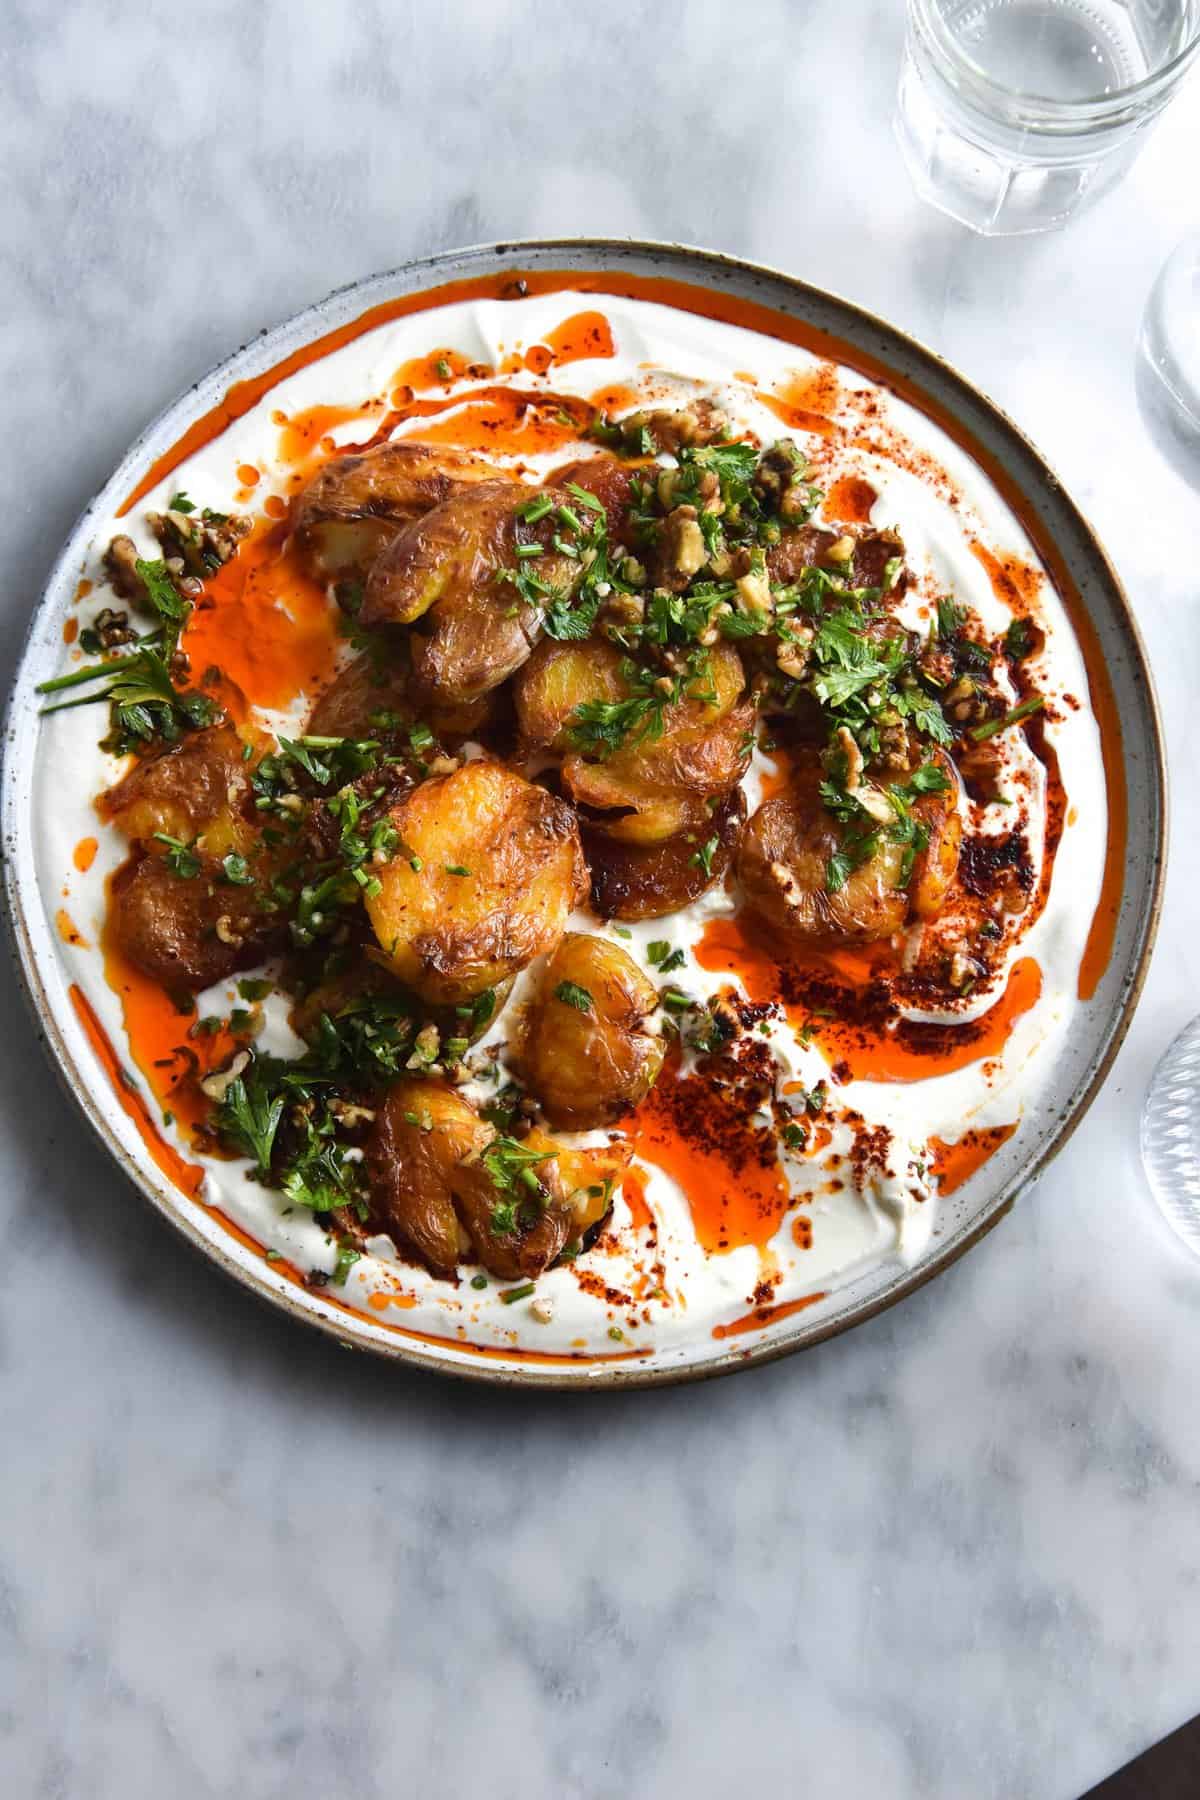 An aerial view of a plate of garlic and chilli oil smothered crispy smashed potatoes on a bed of zingy spiked yoghurt and topped with a walnut herb salsa. The ceramic plate is white, and sits in the centre of the white marble table. Two water glasses sit to the right of the image.